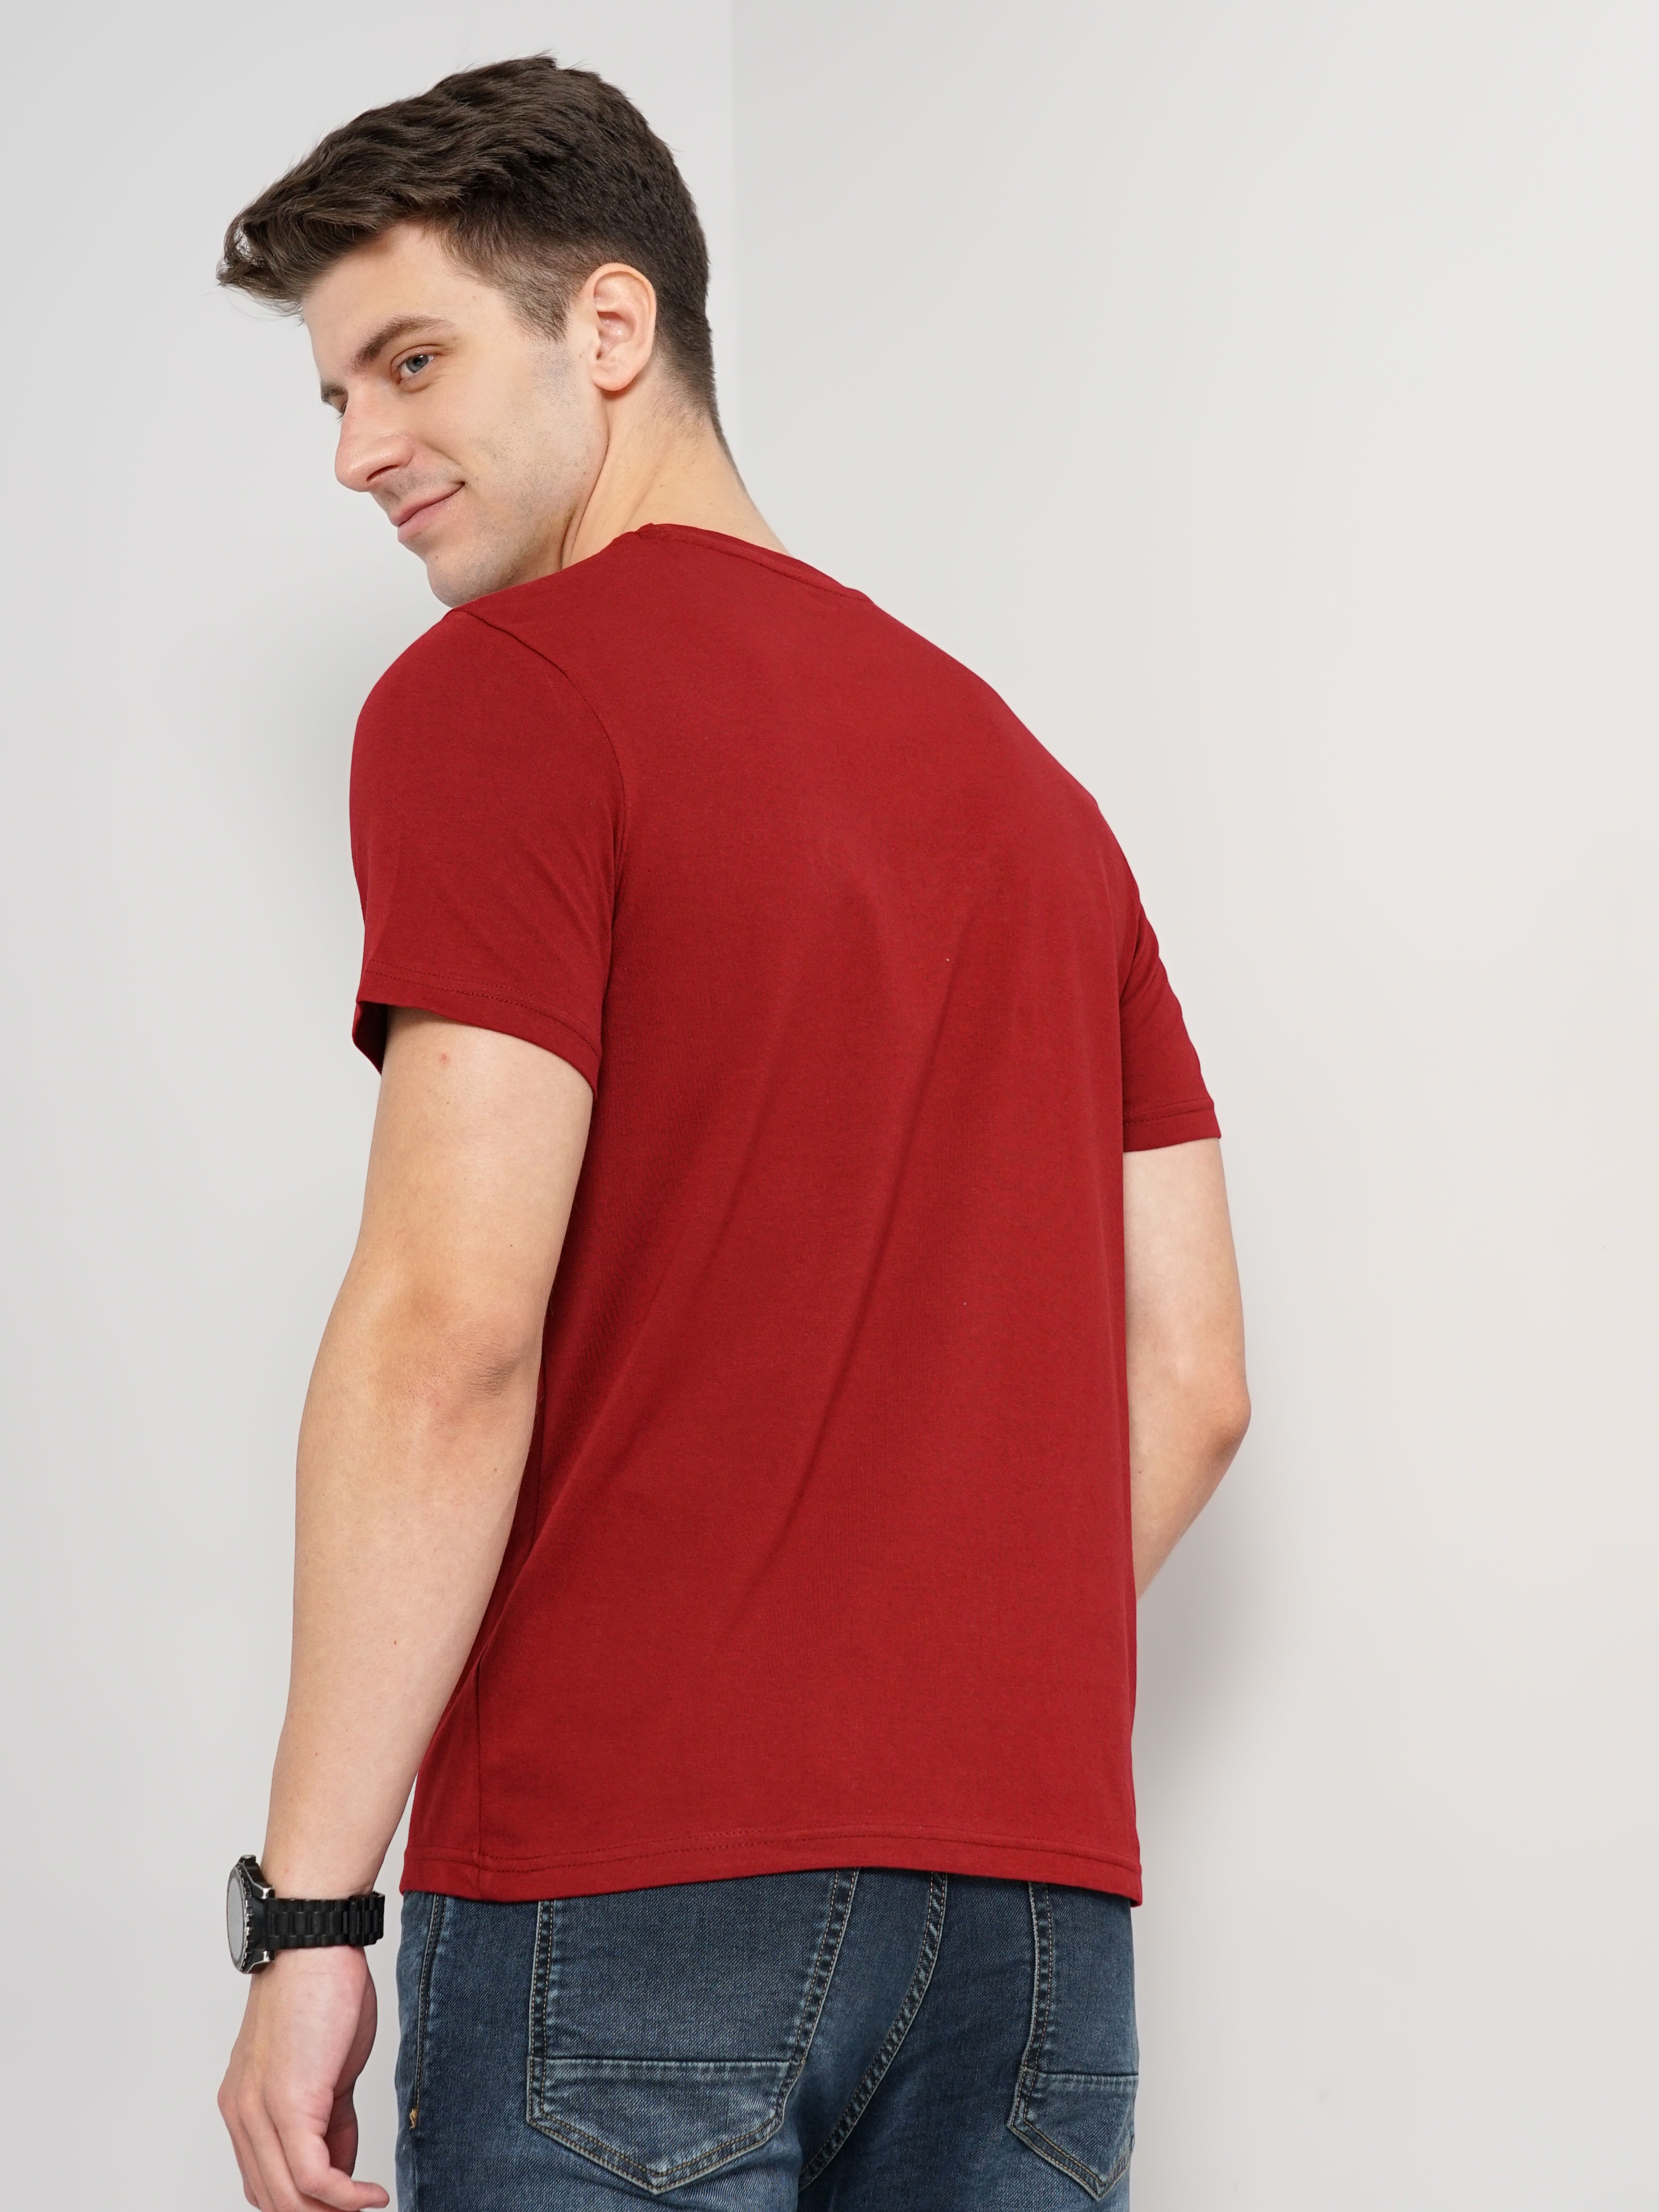 Men's Red Knitted Regular T-Shirts